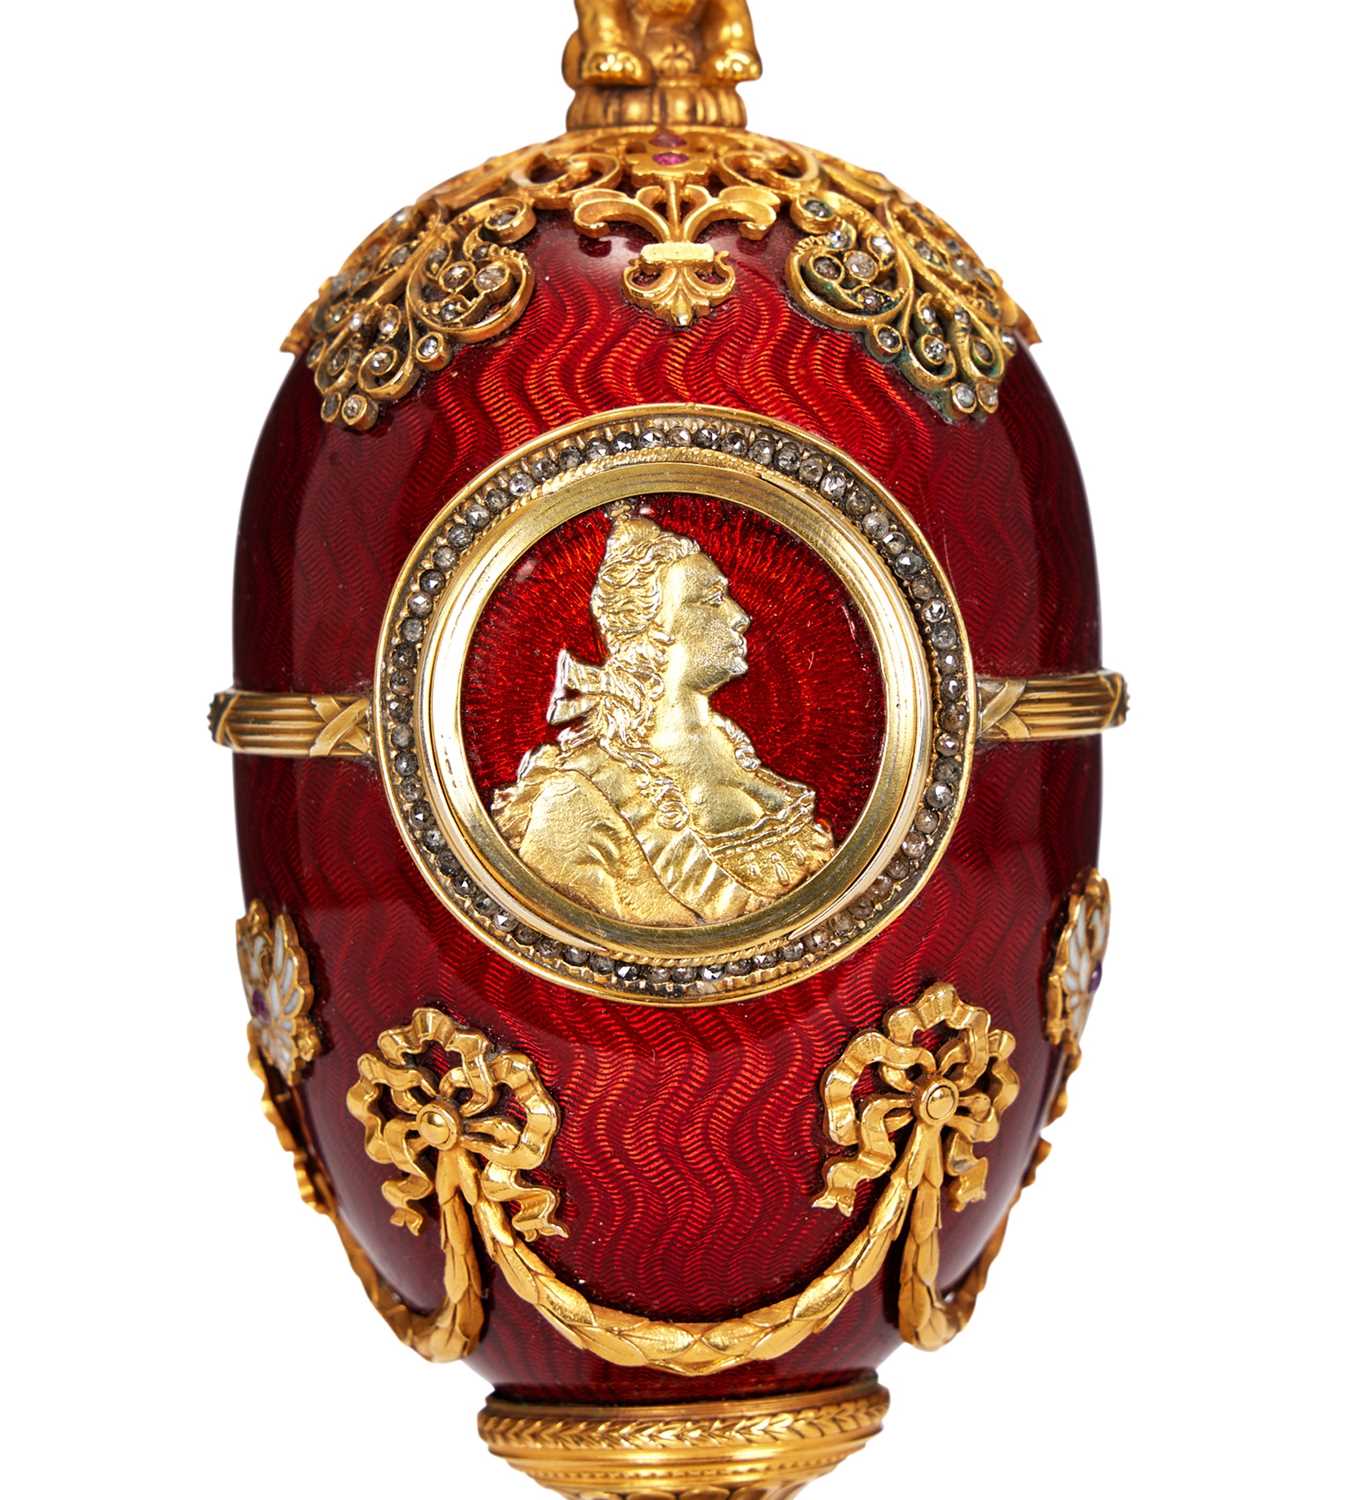 A FABERGE STYLE DIAMOND ENCRUSTED, GUILLOCHE ENAMEL AND SILVER GILT EGG - Image 5 of 6